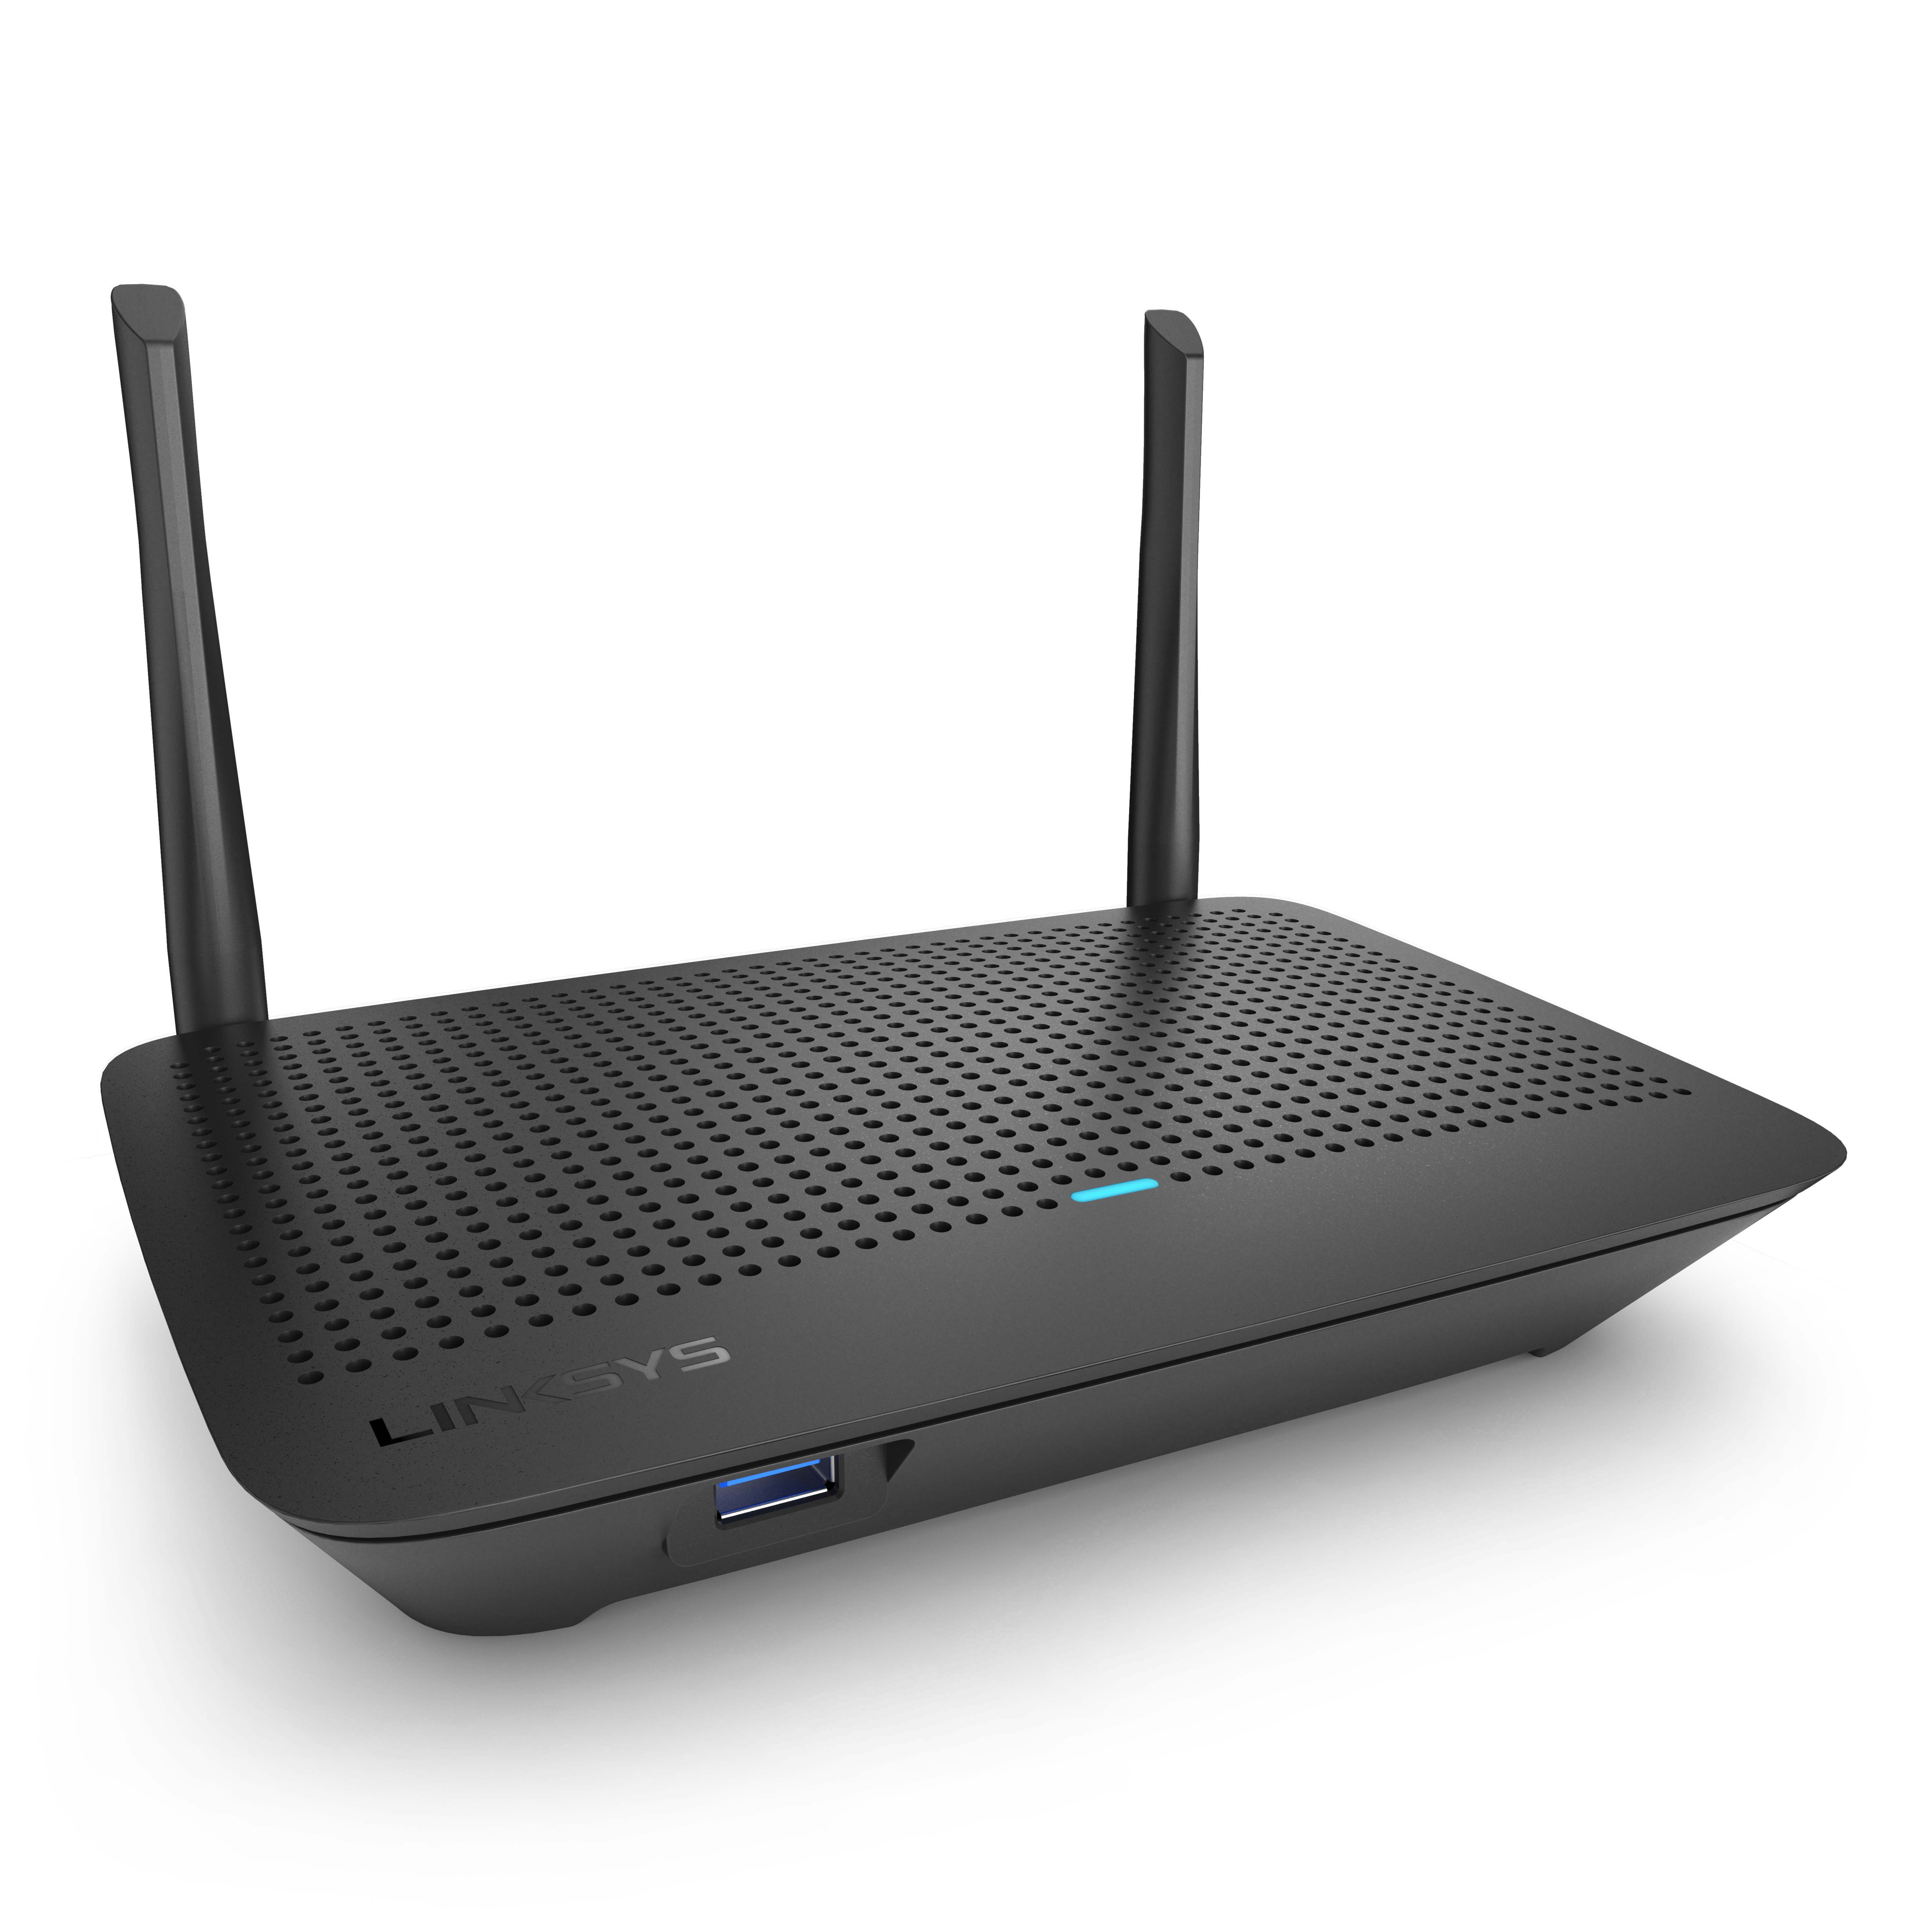 【2020 Newest】 Smart WiFi Router Dual Band Gigabit Wireless Internet Router for Home AC1200 High Speed Internet Router with USB 2.0 & SD Card Slot VPN Server Firewall Parental Control 